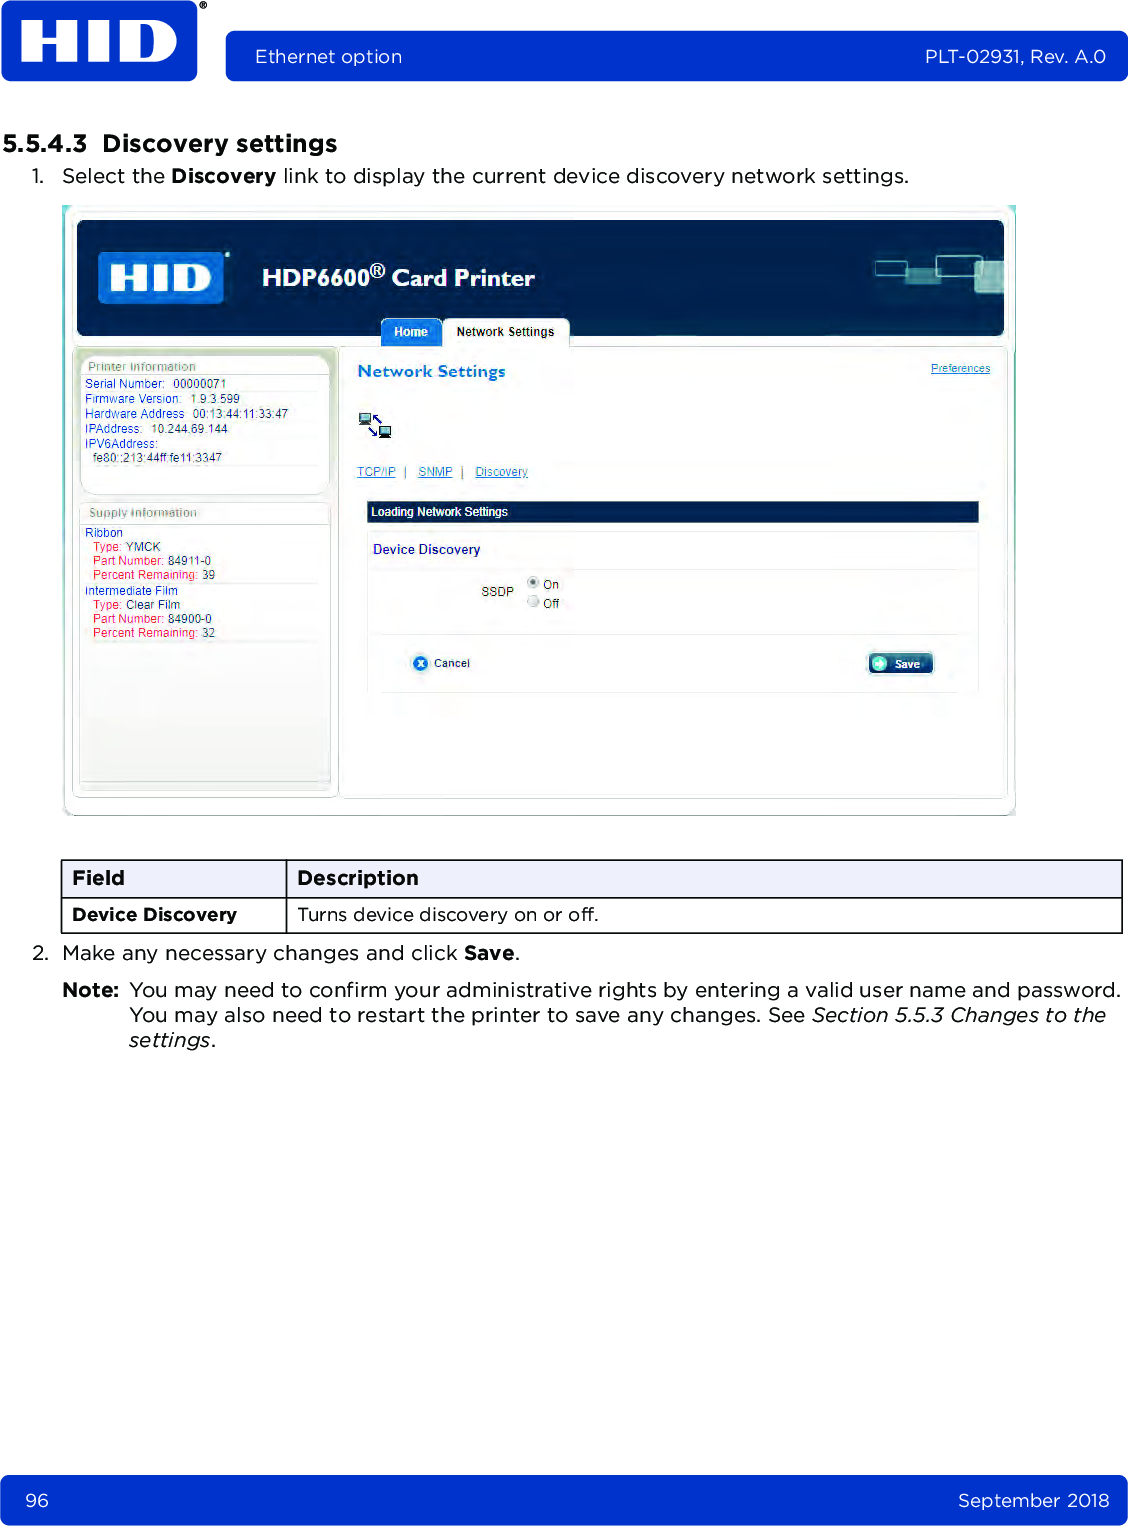 96 September 2018Ethernet option PLT-02931, Rev. A.05.5.4.3  Discovery settings1. Select the Discovery link to display the current device discovery network settings.2. Make any necessary changes and click Save. Note: You may need to confirm your administrative rights by entering a valid user name and password. You may also need to restart the printer to save any changes. See Section 5.5.3 Changes to the settings.Field DescriptionDevice Discovery Turns device discovery on or off.